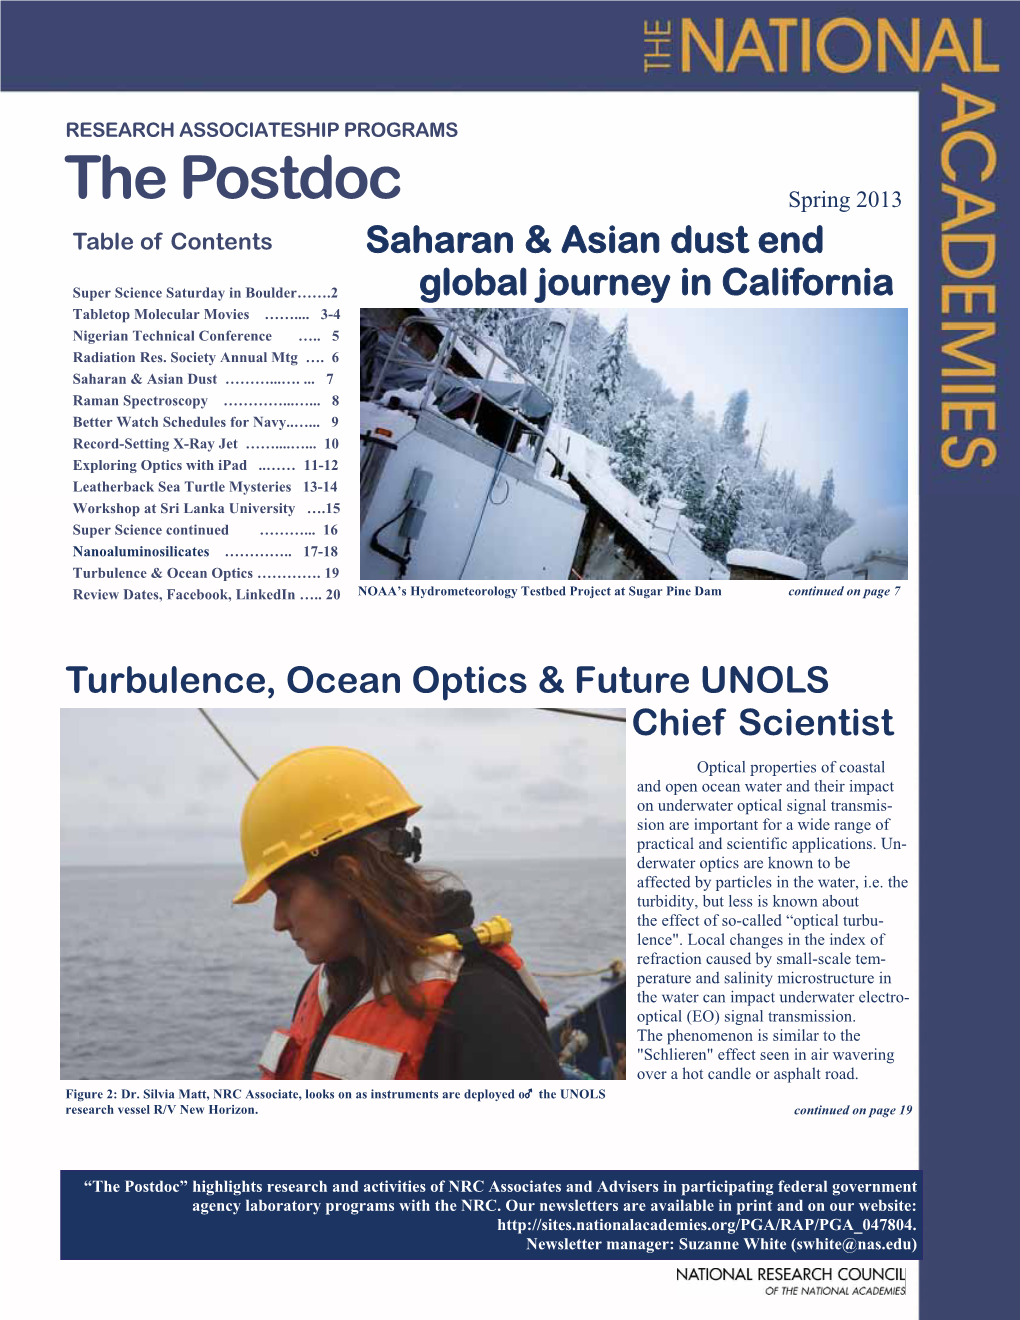 The Postdoc Spring 2013 Table of Contents Saharan & Asian Dust End